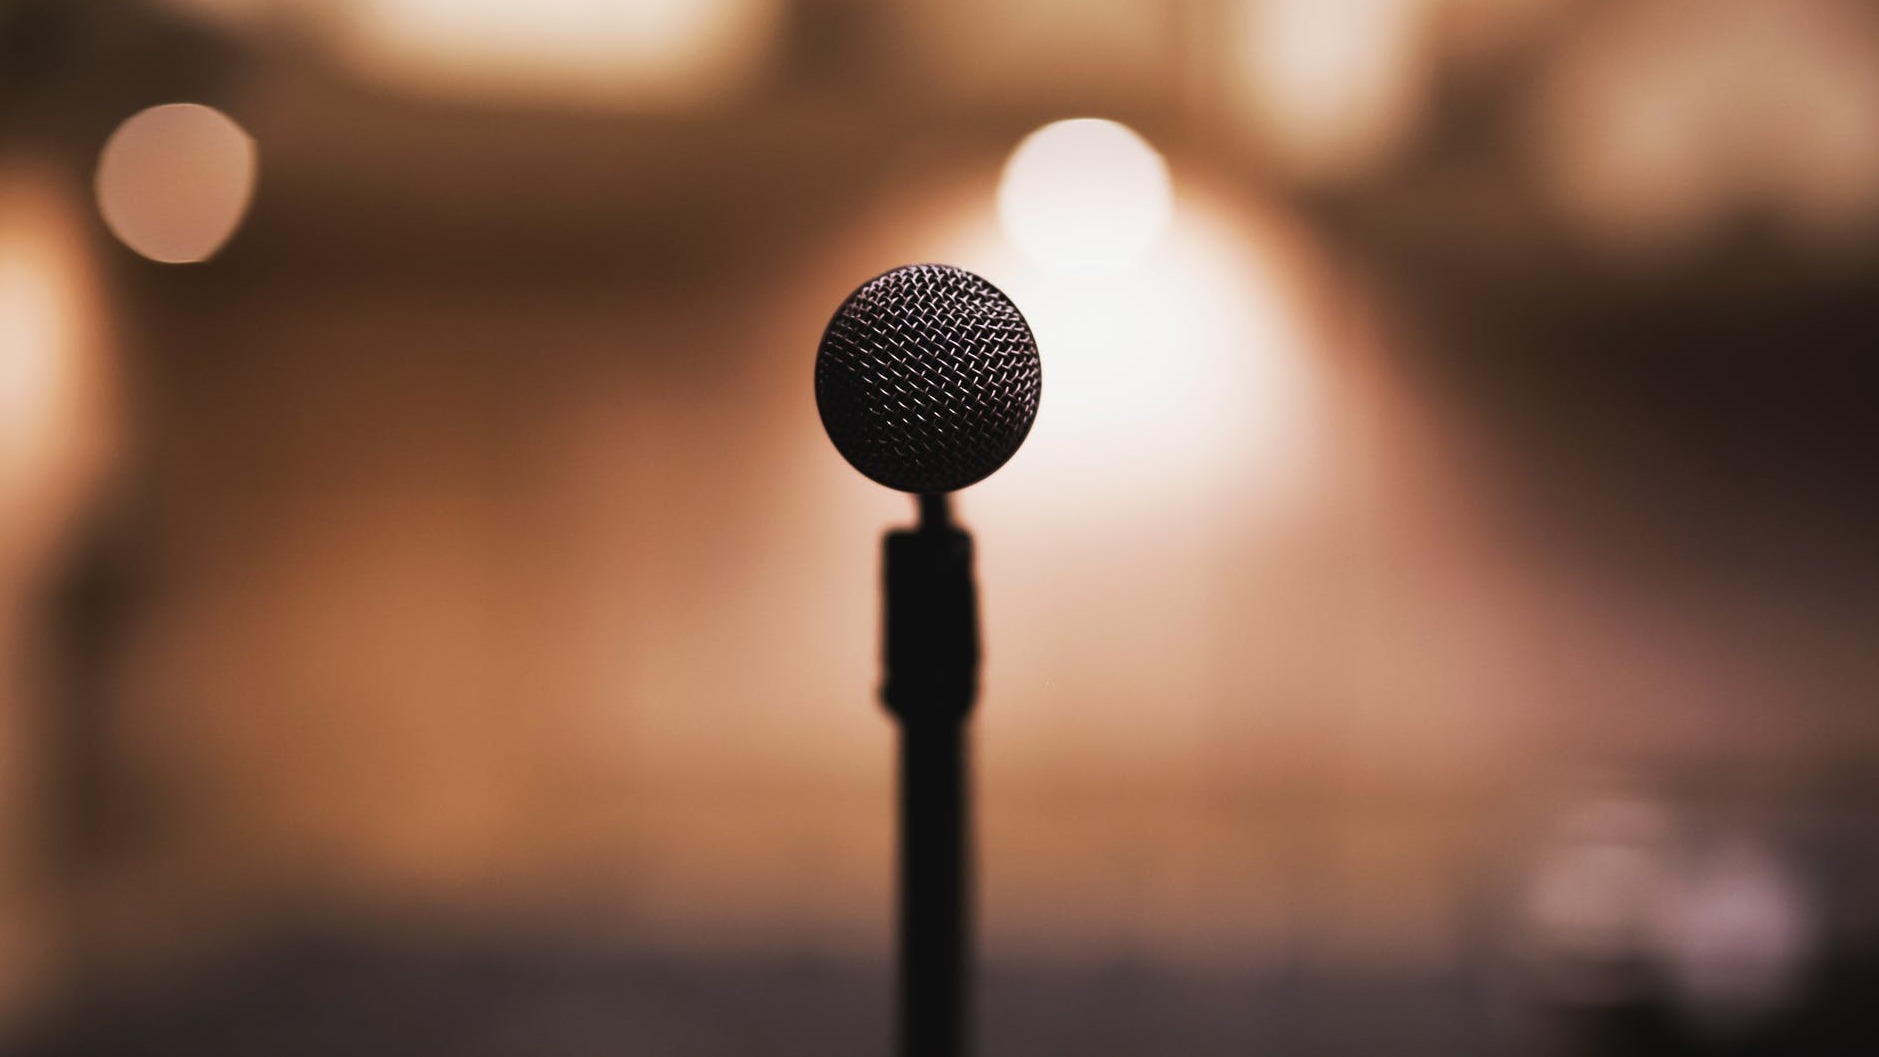 Improve Your Public Speaking With This Free Voice-Controlled Teleprompter